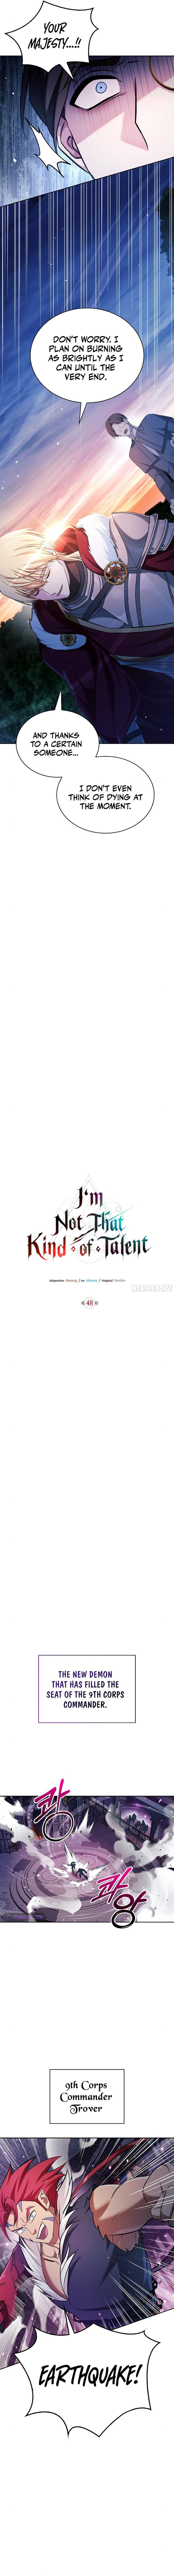 im-not-that-kind-of-talent-chap-48-5